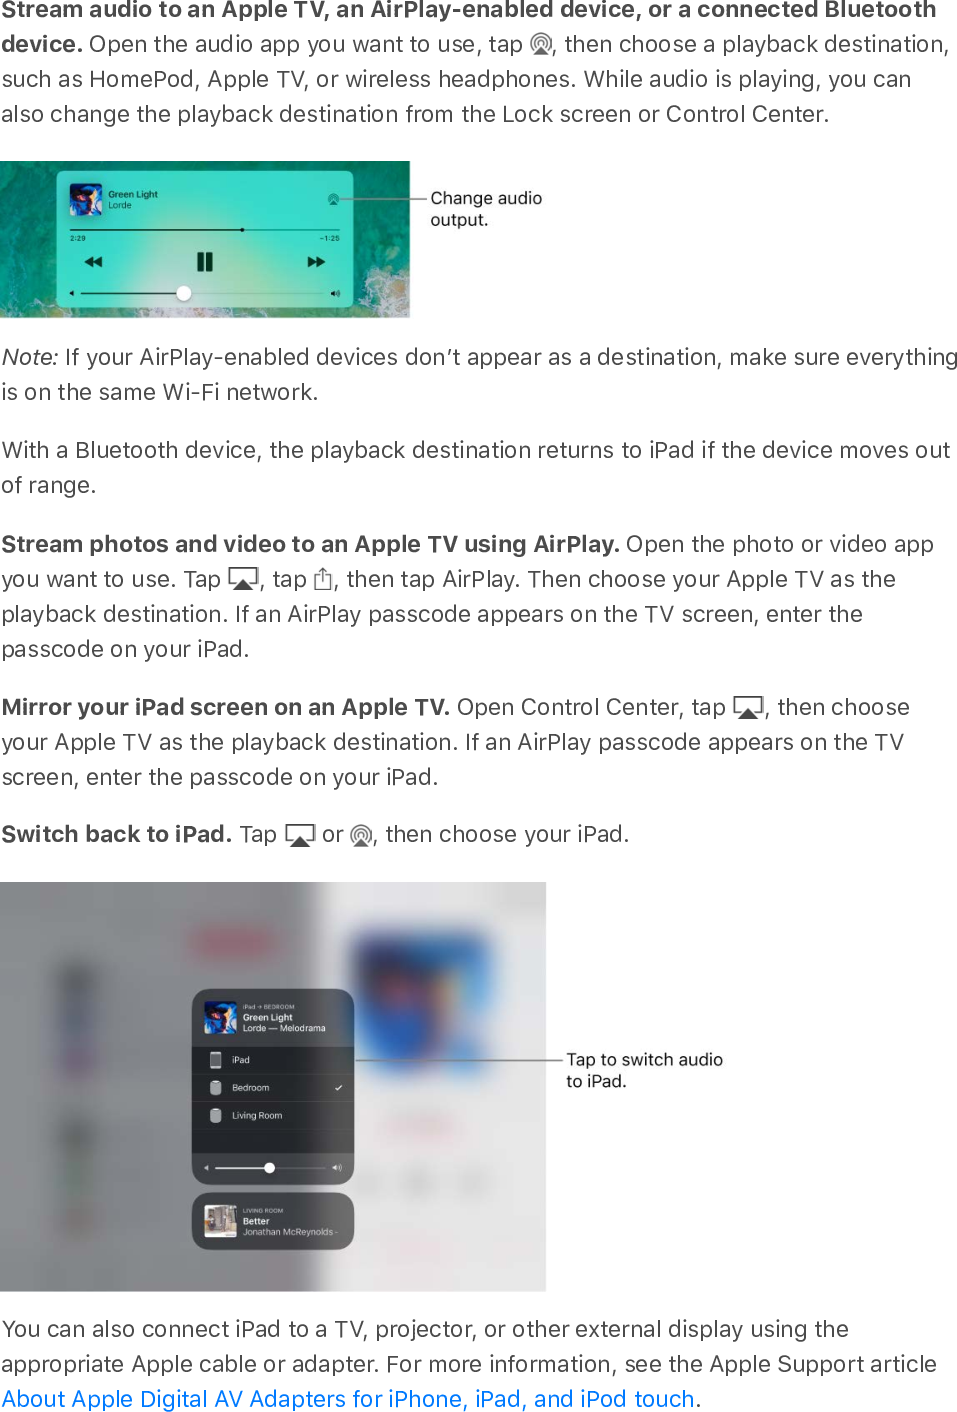 Stream audio to an Apple TV, an AirPlay-enabled device, or a connected Bluetoothdevice. Open the audio app you want to use, tap  , then choose a playback destination,such as HomePod, Apple TV, or wireless headphones. While audio is playing, you canalso change the playback destination from the Lock screen or Control Center.Note: If your AirPlay-enabled devices donʼt appear as a destination, make sure everythingis on the same Wi-Fi network.With a Bluetooth device, the playback destination returns to iPad if the device moves outof range.Stream photos and video to an Apple TV using AirPlay. Open the photo or video appyou want to use. Tap  , tap  , then tap AirPlay. Then choose your Apple TV as theplayback destination. If an AirPlay passcode appears on the TV screen, enter thepasscode on your iPad.Mirror your iPad screen on an Apple TV. Open Control Center, tap  , then chooseyour Apple TV as the playback destination. If an AirPlay passcode appears on the TVscreen, enter the passcode on your iPad.Switch back to iPad. Tap   or  , then choose your iPad.You can also connect iPad to a TV, projector, or other external display using theappropriate Apple cable or adapter. For more information, see the Apple Support article.About Apple Digital AV Adapters for iPhone, iPad, and iPod touch